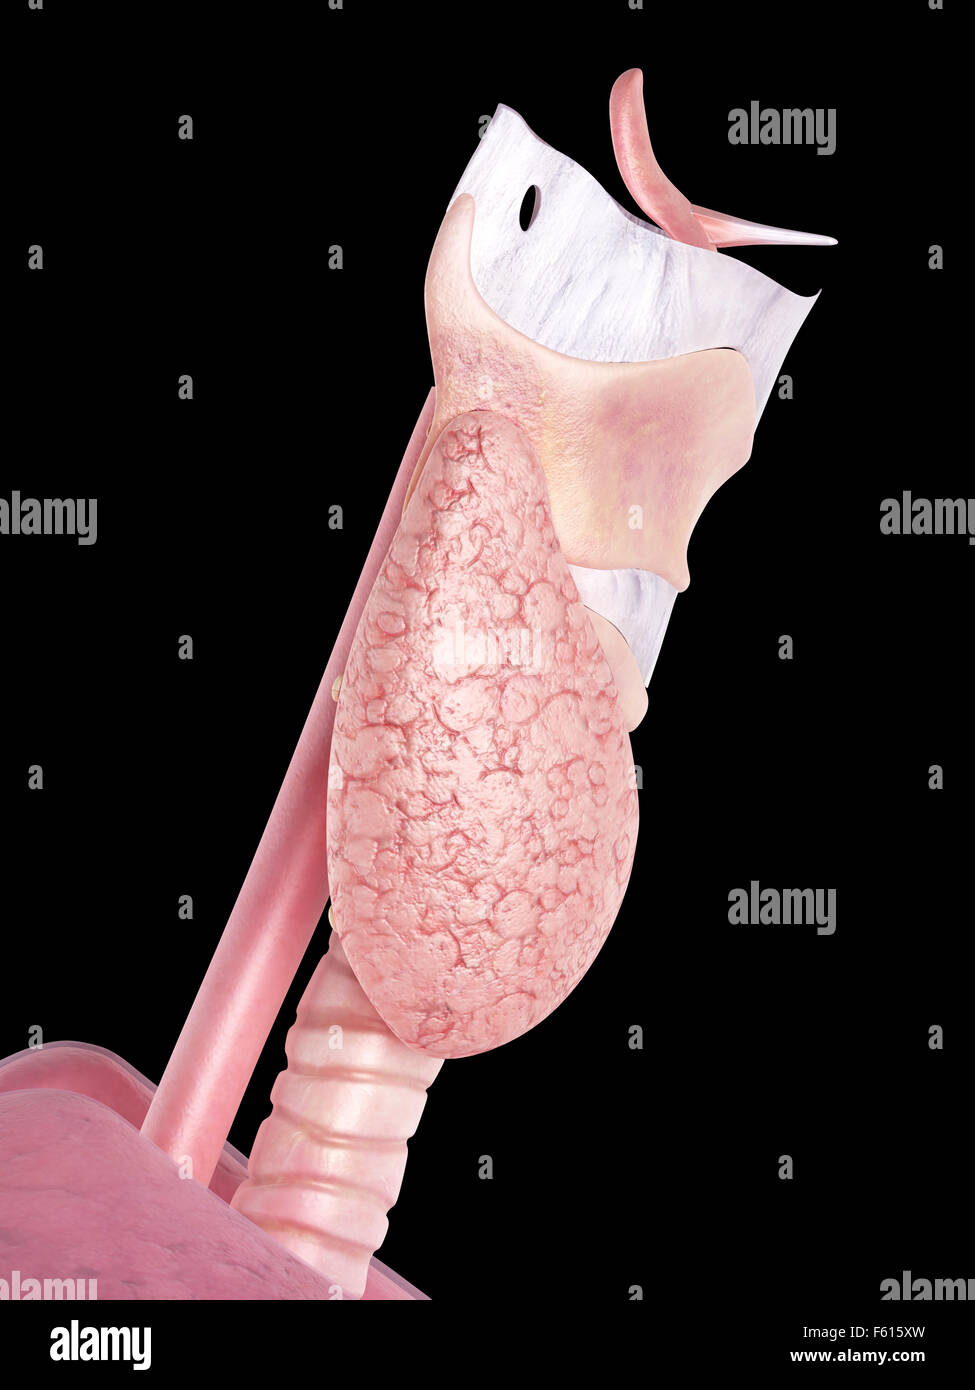 medically accurate illustration of the thyroid gland Stock Photo